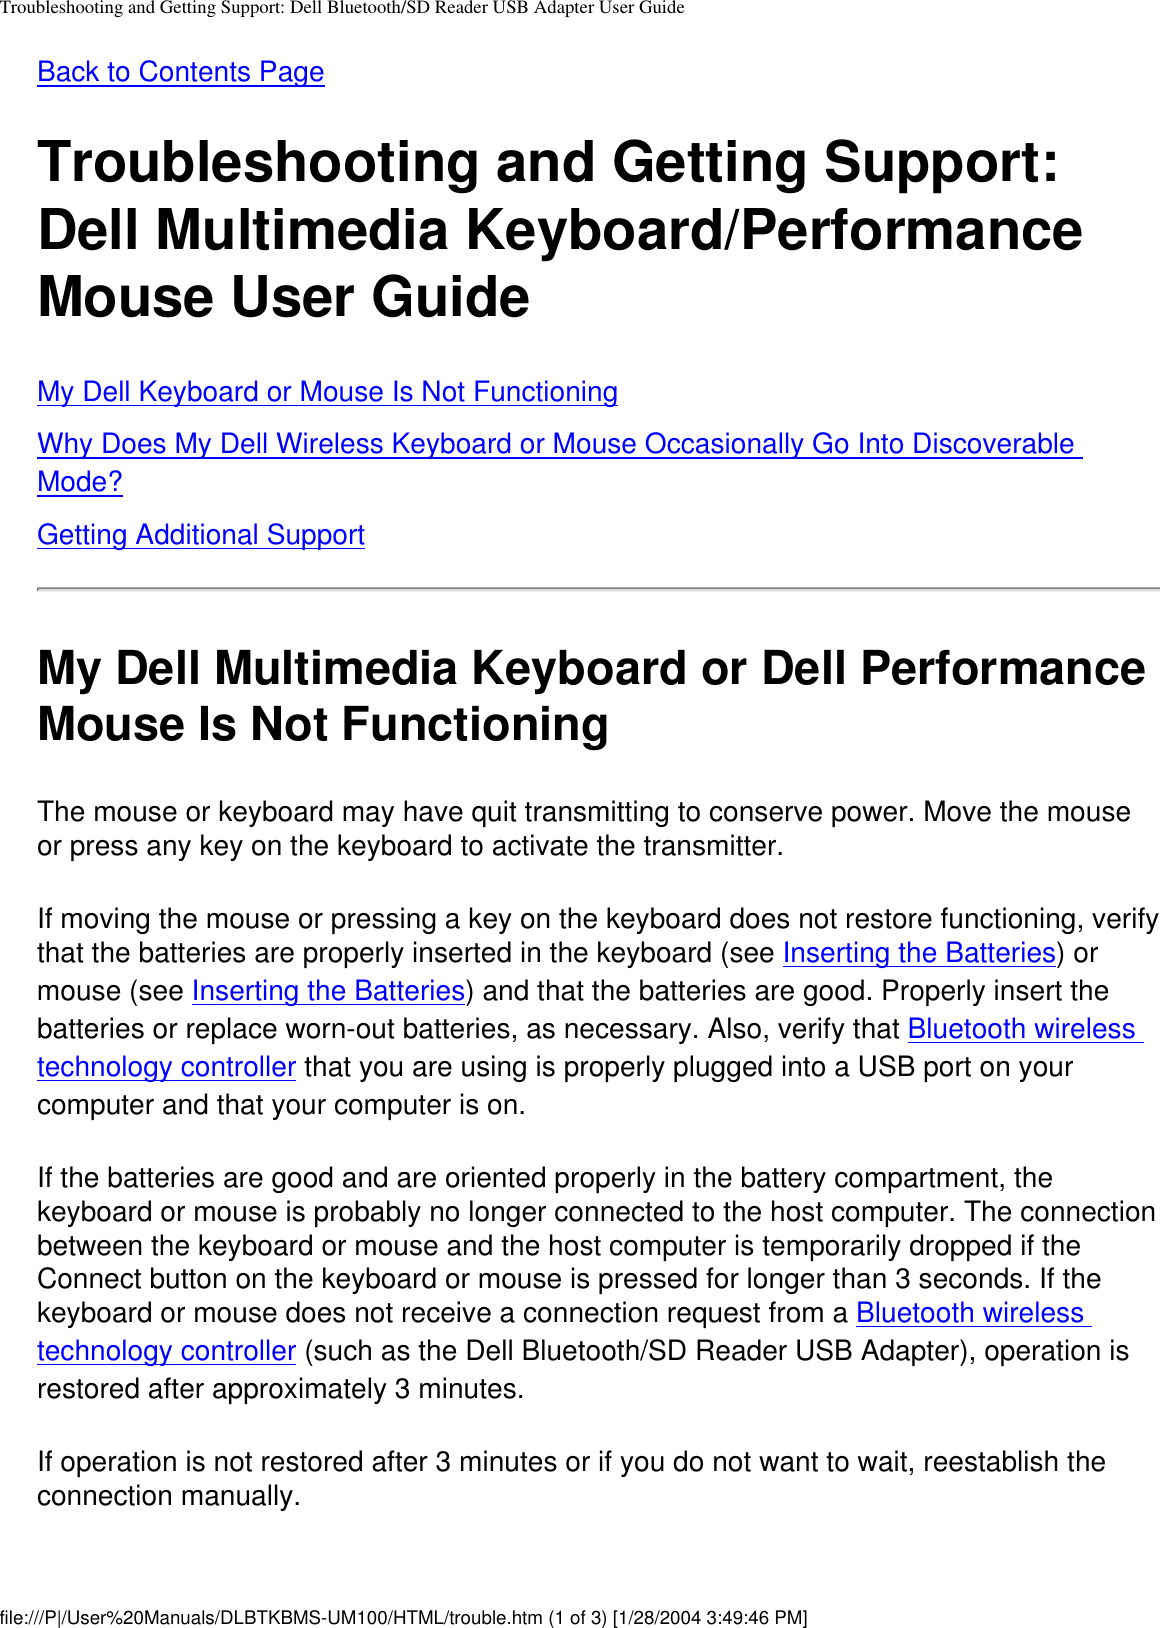 Troubleshooting and Getting Support: Dell Bluetooth/SD Reader USB Adapter User GuideBack to Contents Page Troubleshooting and Getting Support: Dell Multimedia Keyboard/Performance Mouse User GuideMy Dell Keyboard or Mouse Is Not FunctioningWhy Does My Dell Wireless Keyboard or Mouse Occasionally Go Into Discoverable Mode?Getting Additional SupportMy Dell Multimedia Keyboard or Dell Performance Mouse Is Not FunctioningThe mouse or keyboard may have quit transmitting to conserve power. Move the mouse or press any key on the keyboard to activate the transmitter. If moving the mouse or pressing a key on the keyboard does not restore functioning, verify that the batteries are properly inserted in the keyboard (see Inserting the Batteries) or mouse (see Inserting the Batteries) and that the batteries are good. Properly insert the batteries or replace worn-out batteries, as necessary. Also, verify that Bluetooth wireless technology controller that you are using is properly plugged into a USB port on your computer and that your computer is on.If the batteries are good and are oriented properly in the battery compartment, the keyboard or mouse is probably no longer connected to the host computer. The connection between the keyboard or mouse and the host computer is temporarily dropped if the Connect button on the keyboard or mouse is pressed for longer than 3 seconds. If the keyboard or mouse does not receive a connection request from a Bluetooth wireless technology controller (such as the Dell Bluetooth/SD Reader USB Adapter), operation is restored after approximately 3 minutes.If operation is not restored after 3 minutes or if you do not want to wait, reestablish the connection manually.file:///P|/User%20Manuals/DLBTKBMS-UM100/HTML/trouble.htm (1 of 3) [1/28/2004 3:49:46 PM]